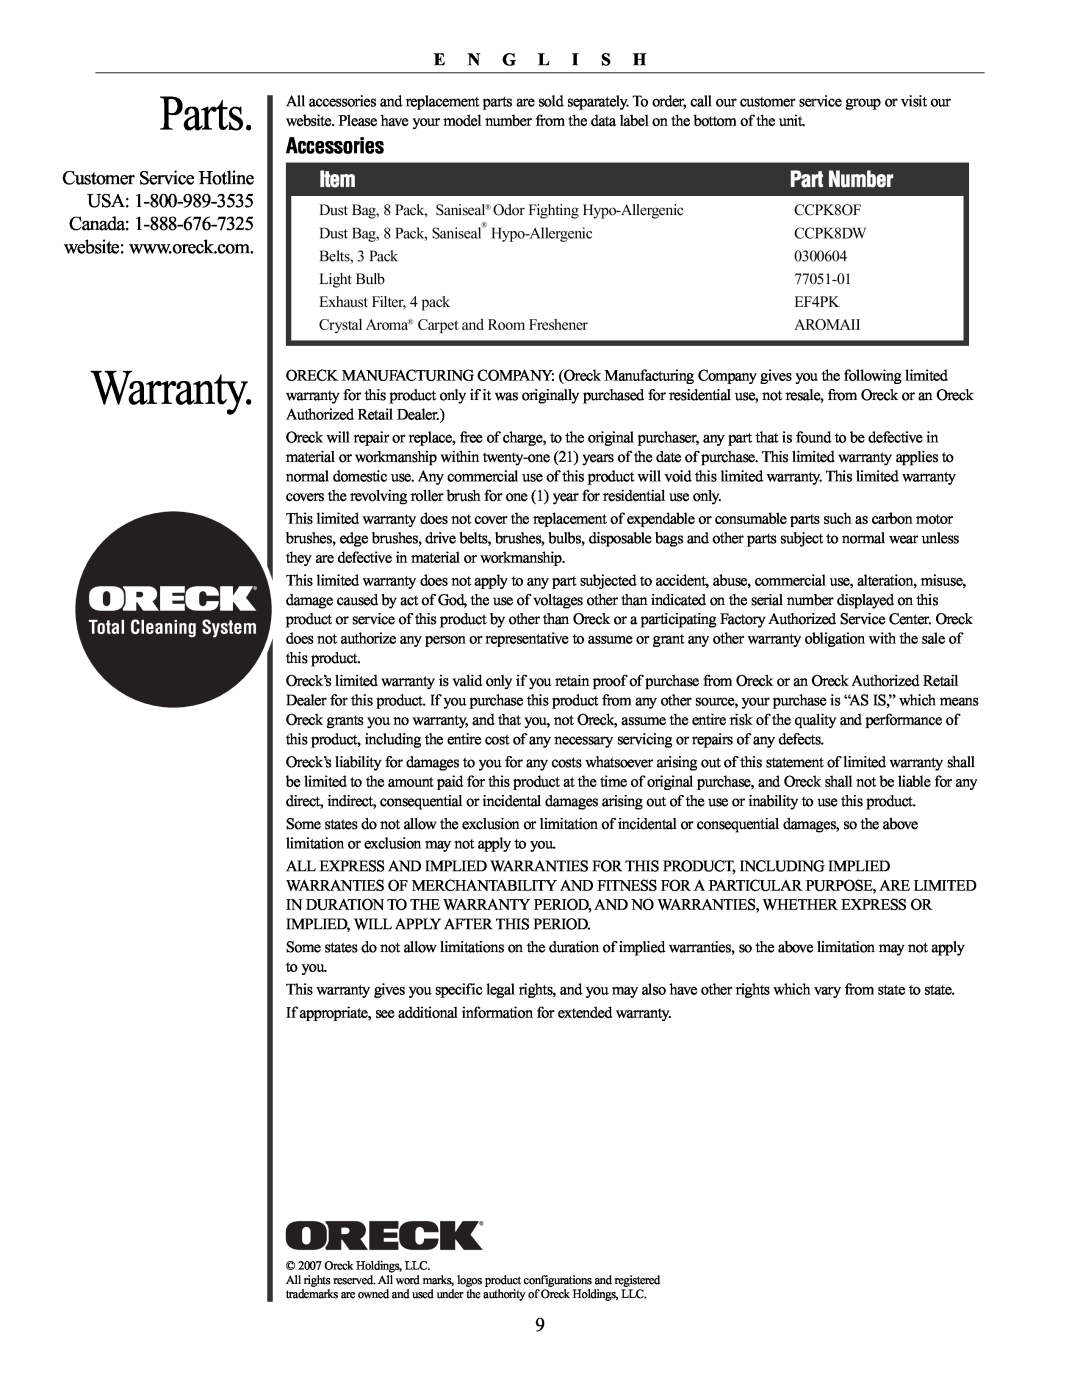 Oreck XL21 manual Parts, Warranty, Accessories, Usa, Canada, E N G L I S H, Total Cleaning System, Part Number 